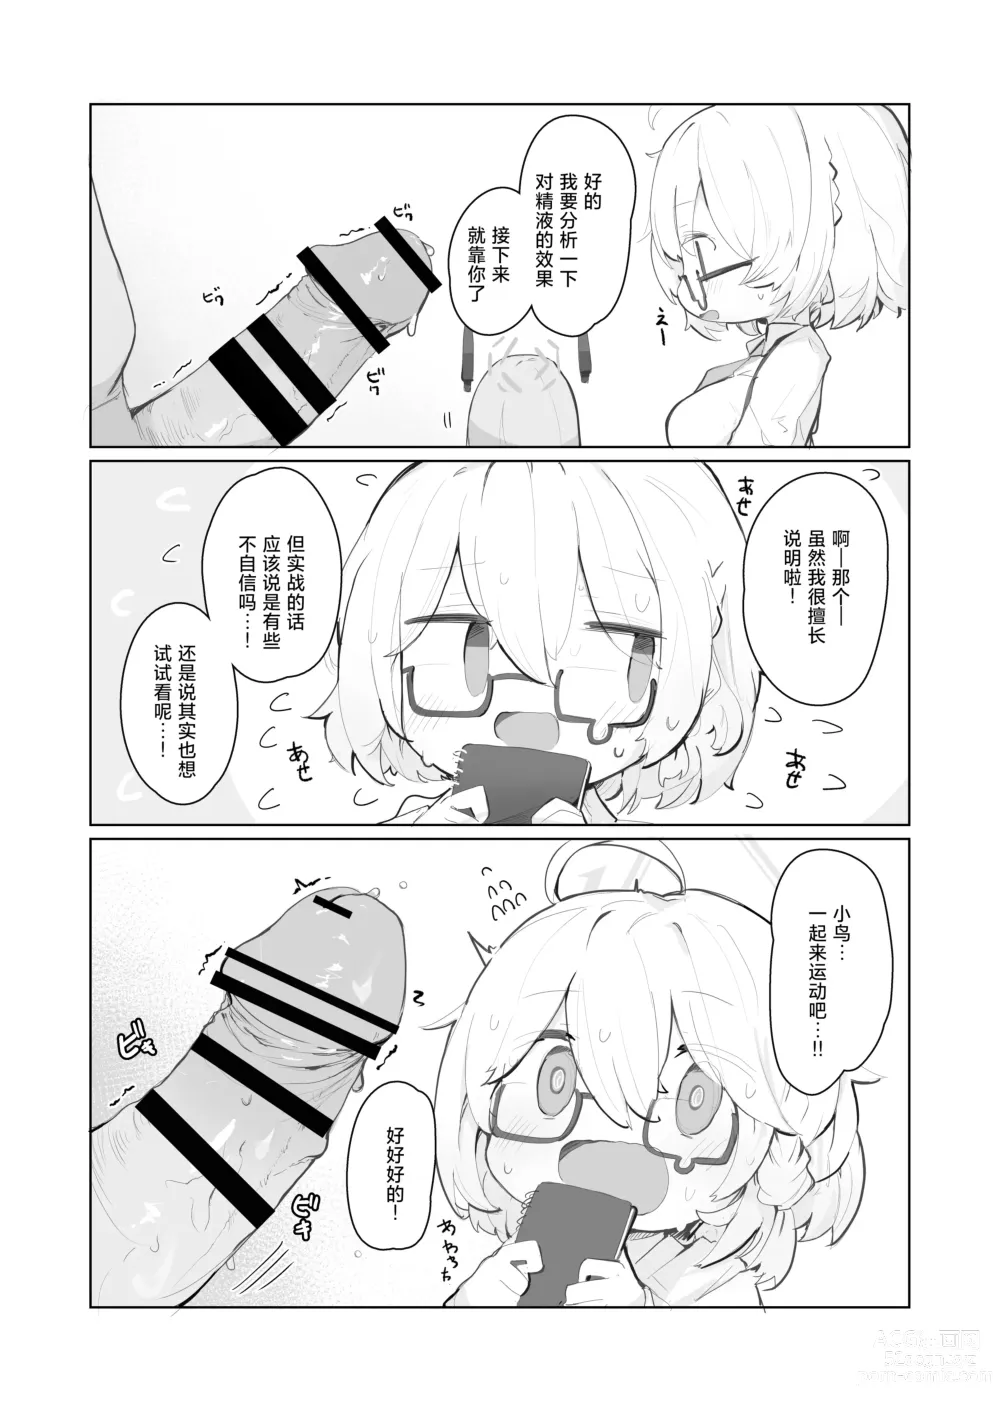 Page 22 of doujinshi 真理部催眠本